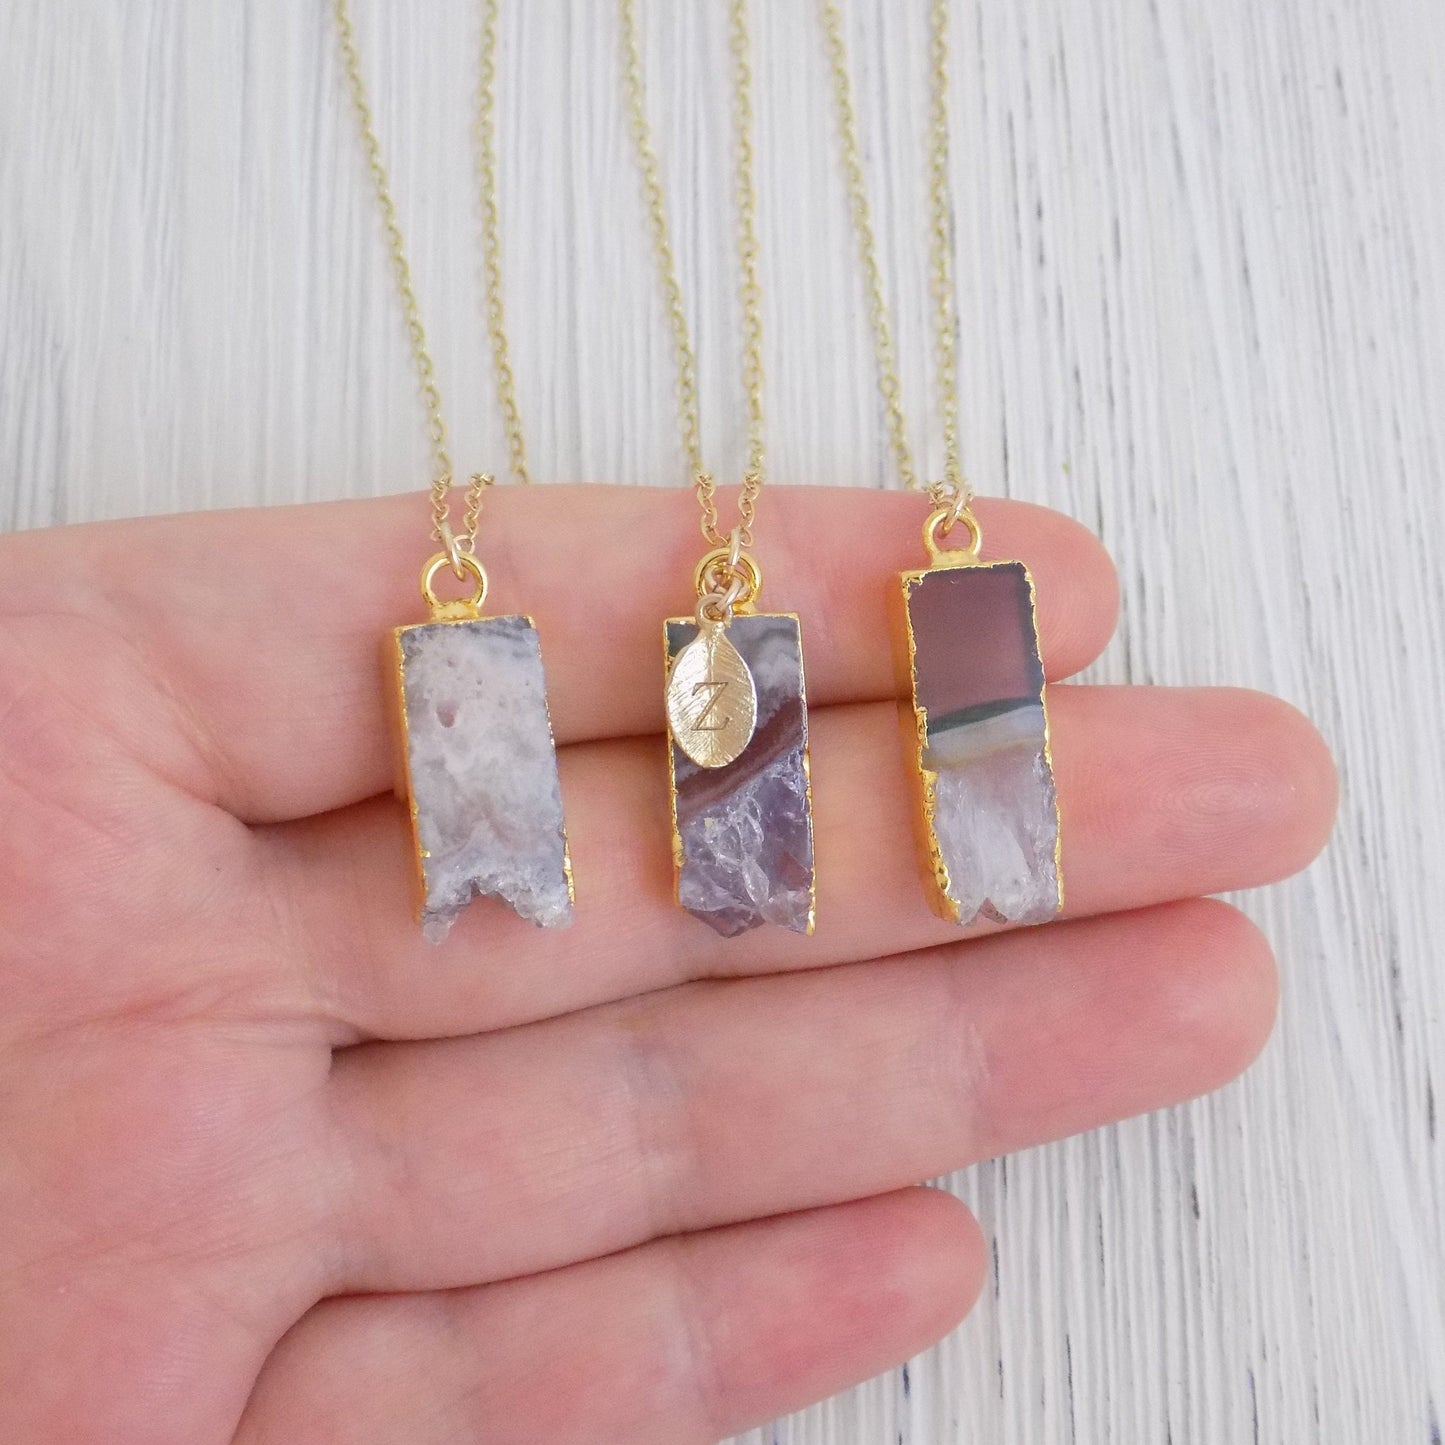 Amethyst Necklace, Personalized Necklace, Boho Raw Amethyst Pendant, February Birthstone, Druzy Necklace, Gold Layer, Gift For Women, R14-10